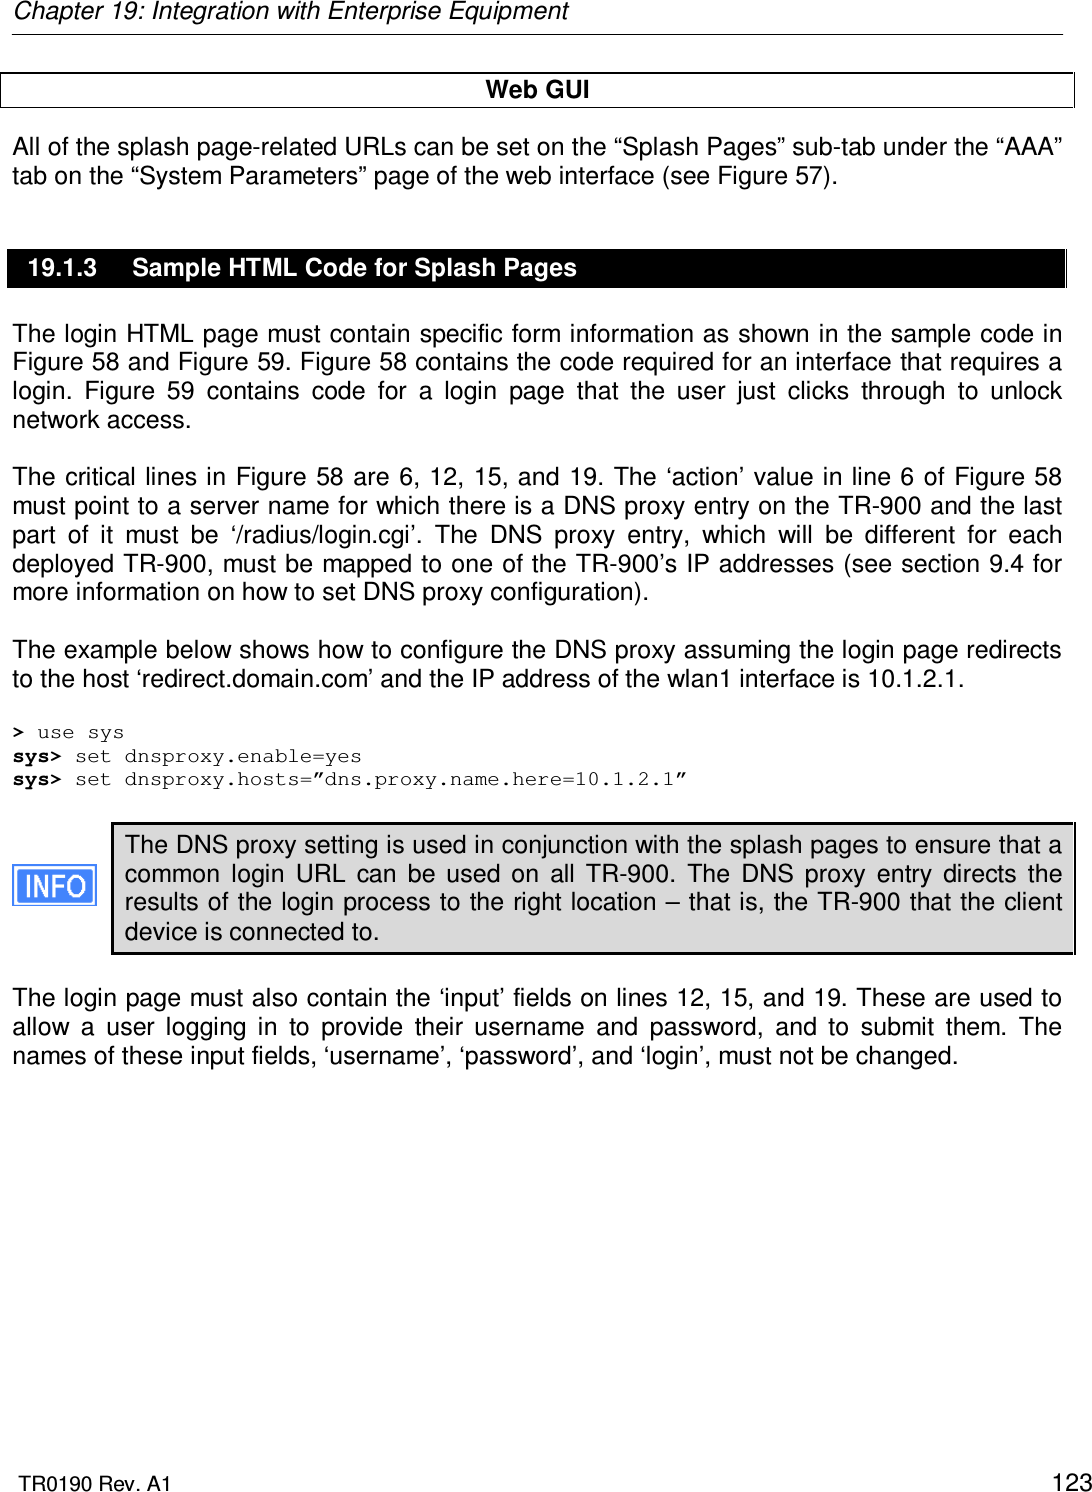 Chapter 19: Integration with Enterprise Equipment  TR0190 Rev. A1    123 Web GUI All of the splash page-related URLs can be set on the “Splash Pages” sub-tab under the “AAA” tab on the “System Parameters” page of the web interface (see Figure 57). 19.1.3  Sample HTML Code for Splash Pages The login HTML page must contain specific form information as shown in the sample code in Figure 58 and Figure 59. Figure 58 contains the code required for an interface that requires a login.  Figure  59  contains  code  for  a  login  page  that  the  user  just  clicks  through  to  unlock network access.   The critical lines in Figure 58 are 6, 12, 15, and 19. The ‘action’ value in line 6 of Figure 58 must point to a server name for which there is a DNS proxy entry on the TR-900 and the last part  of  it  must  be  ‘/radius/login.cgi’.  The  DNS  proxy  entry,  which  will  be  different  for  each deployed TR-900, must be mapped to one of the TR-900’s IP addresses (see section 9.4 for more information on how to set DNS proxy configuration).   The example below shows how to configure the DNS proxy assuming the login page redirects to the host ‘redirect.domain.com’ and the IP address of the wlan1 interface is 10.1.2.1.  &gt; use sys sys&gt; set dnsproxy.enable=yes sys&gt; set dnsproxy.hosts=”dns.proxy.name.here=10.1.2.1”  The DNS proxy setting is used in conjunction with the splash pages to ensure that a common  login  URL  can  be  used  on  all  TR-900.  The  DNS  proxy  entry  directs  the results of the login process to the right location – that is, the TR-900 that the client device is connected to.  The login page must also contain the ‘input’ fields on lines 12, 15, and 19. These are used to allow  a  user  logging  in  to  provide  their  username  and  password,  and  to  submit  them.  The names of these input fields, ‘username’, ‘password’, and ‘login’, must not be changed.   